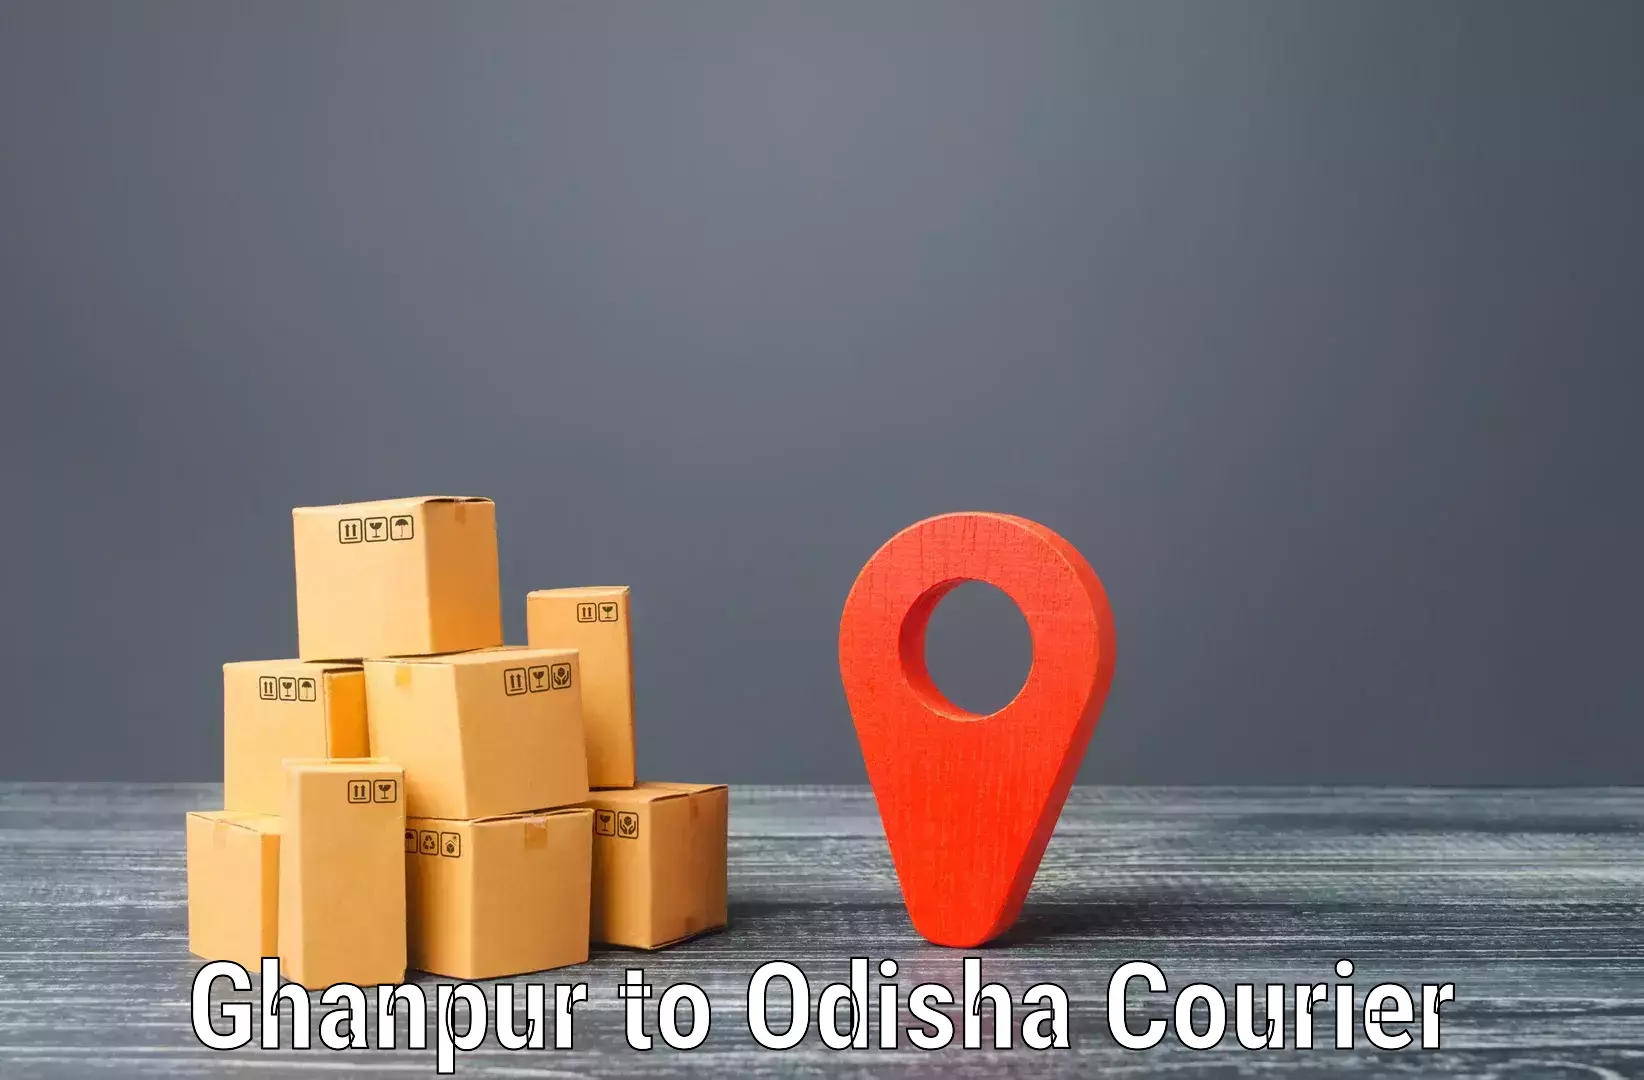 Comprehensive shipping network Ghanpur to Talcher